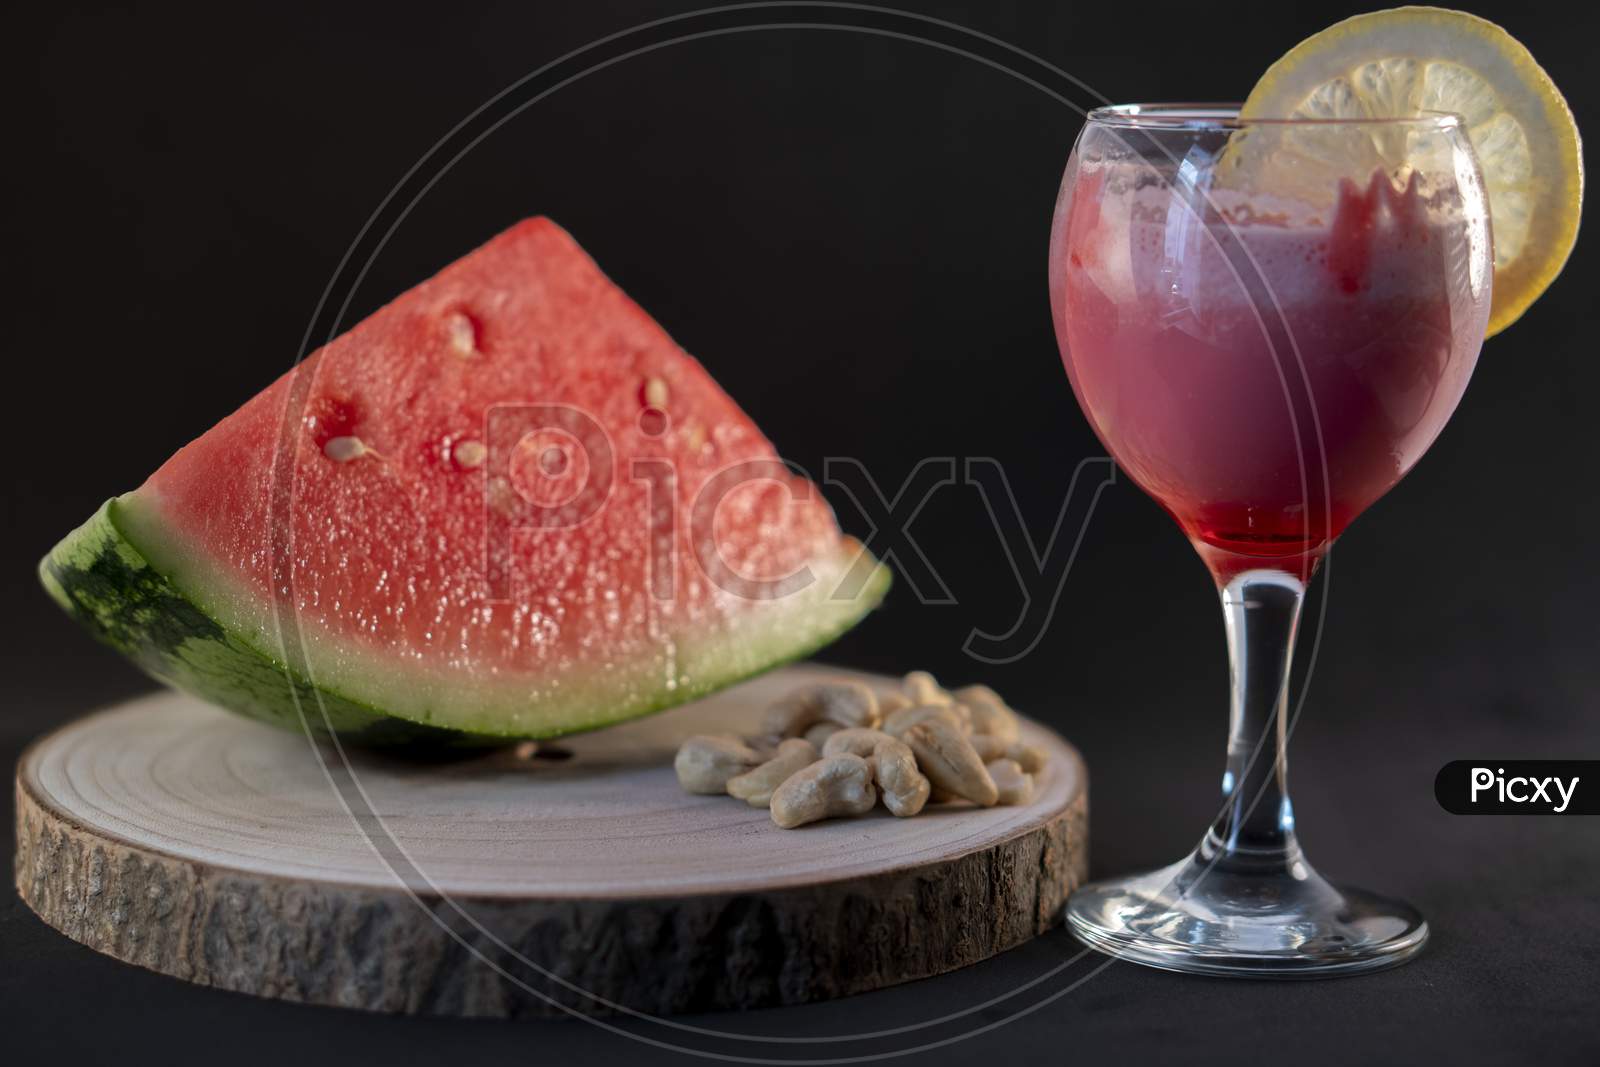 Fresh watermelon juice with a lemon slice, a watermelon piece and Cashew nuts on a black background.